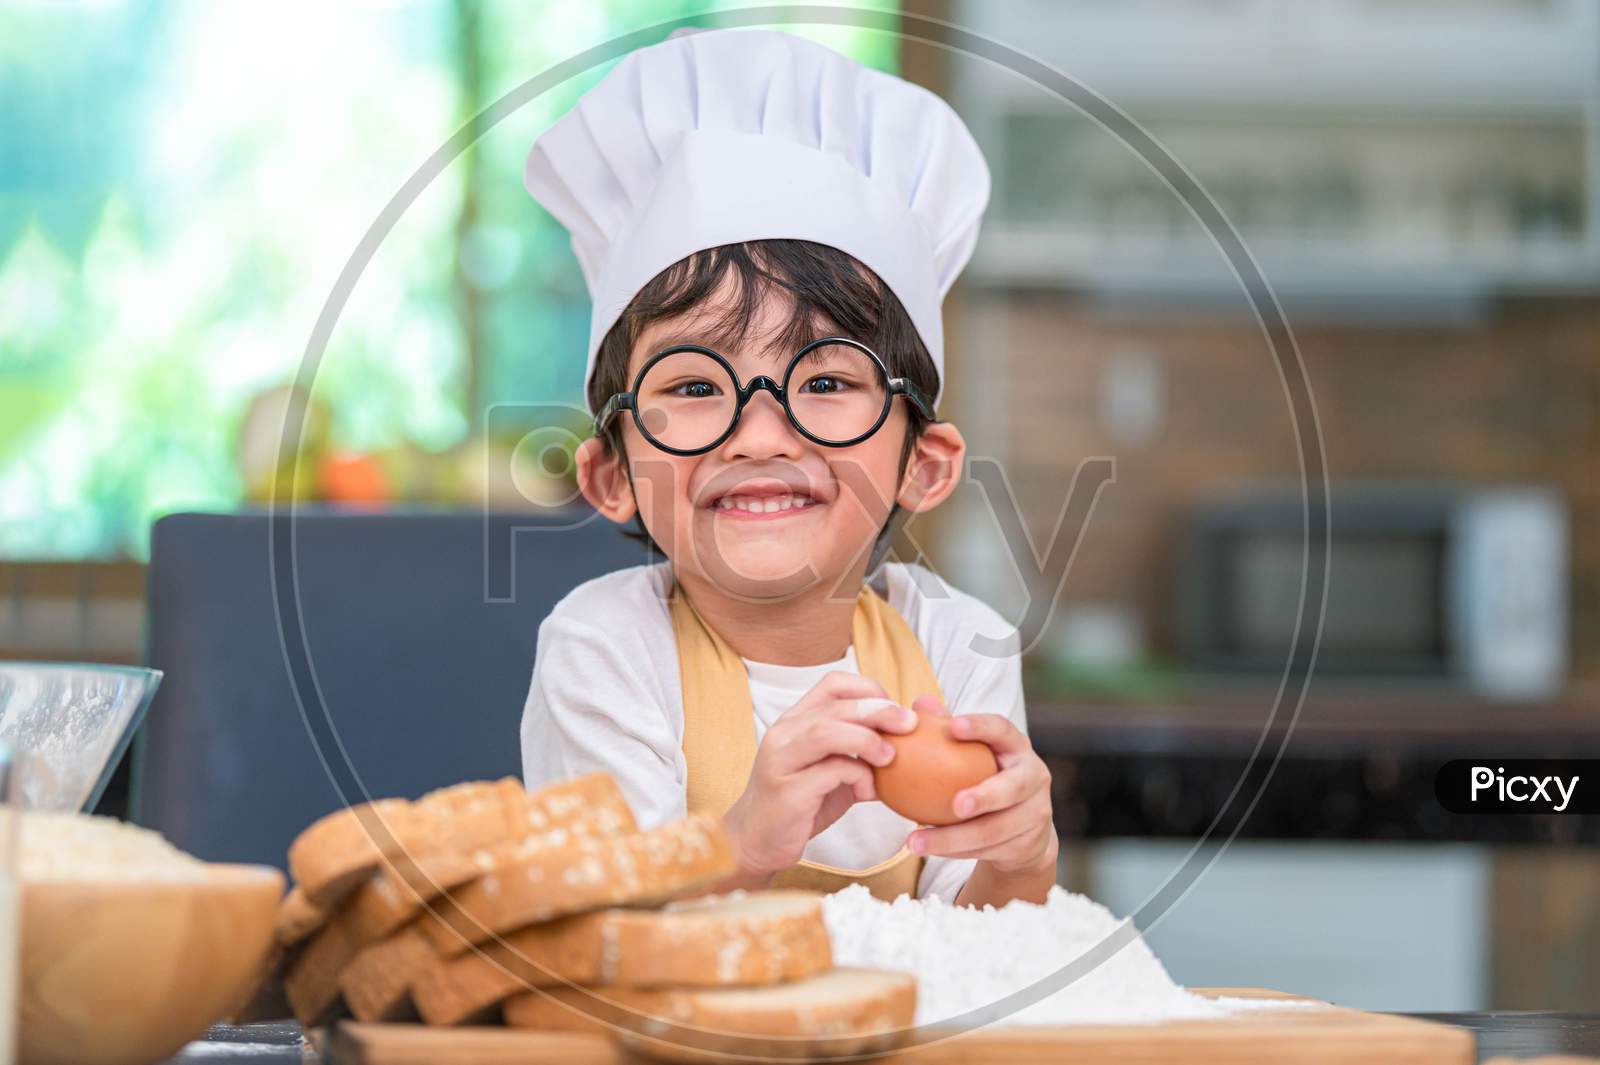 Portrait Cute Little Asian Happy Boy Interested In Cooking Funny In Home Kitchen. People Lifestyles And Family. Homemade Food And Ingredients Concept. Baking Christmas Cake And Cookies. Smiling Child